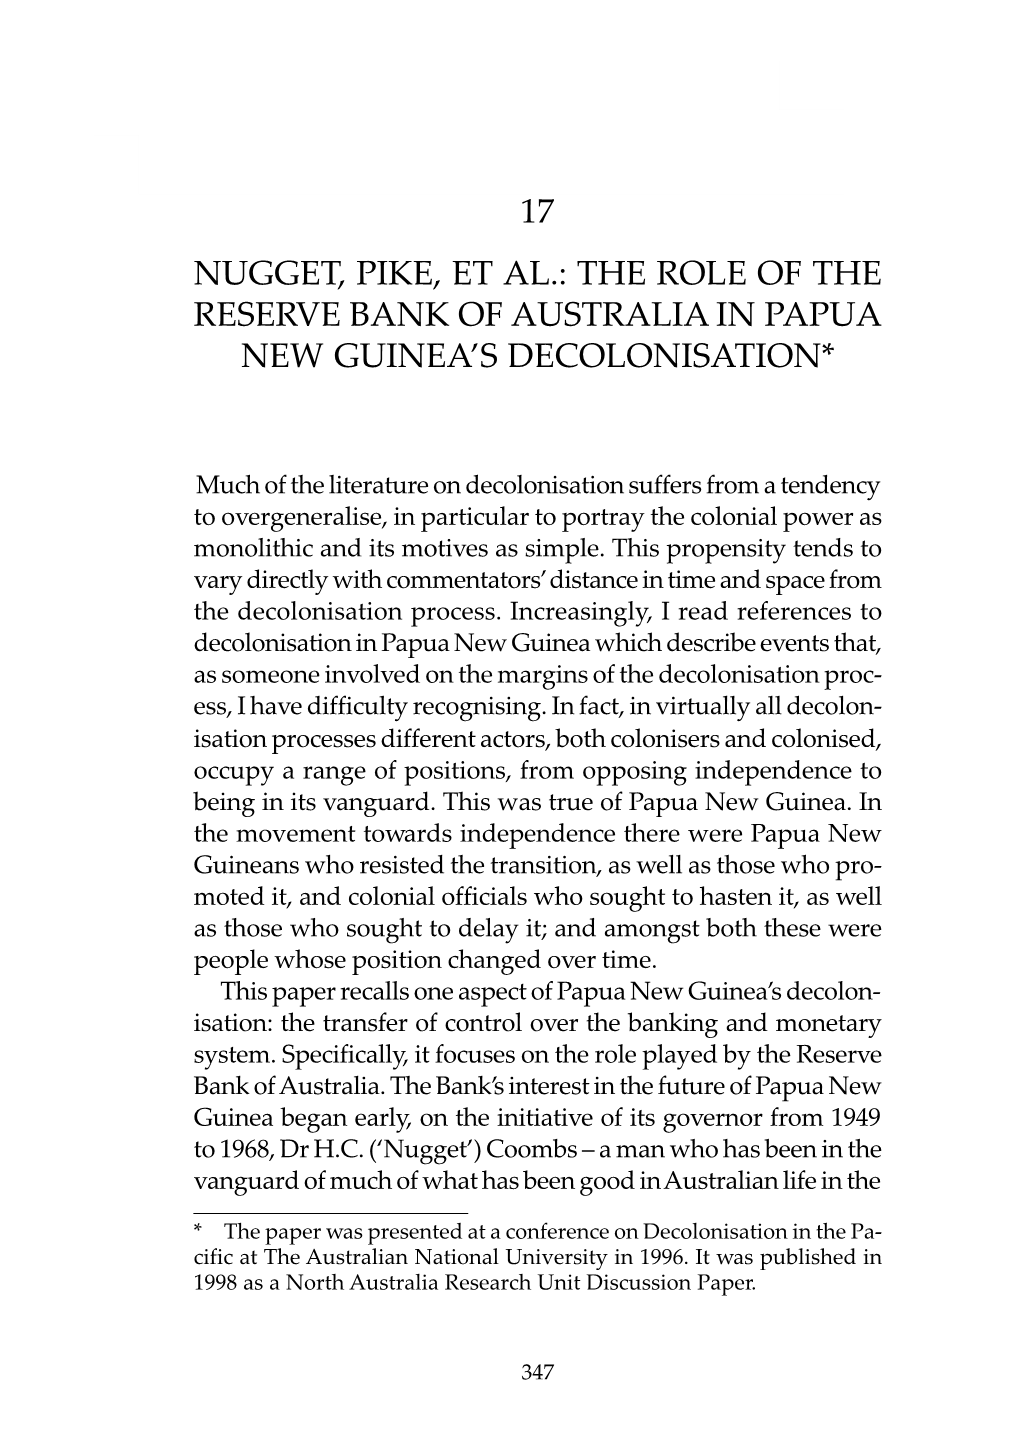 17 Nugget, Pike, Et Al.: the Role of the Reserve Bank of Australia in Papua New Guinea's Decolonisation